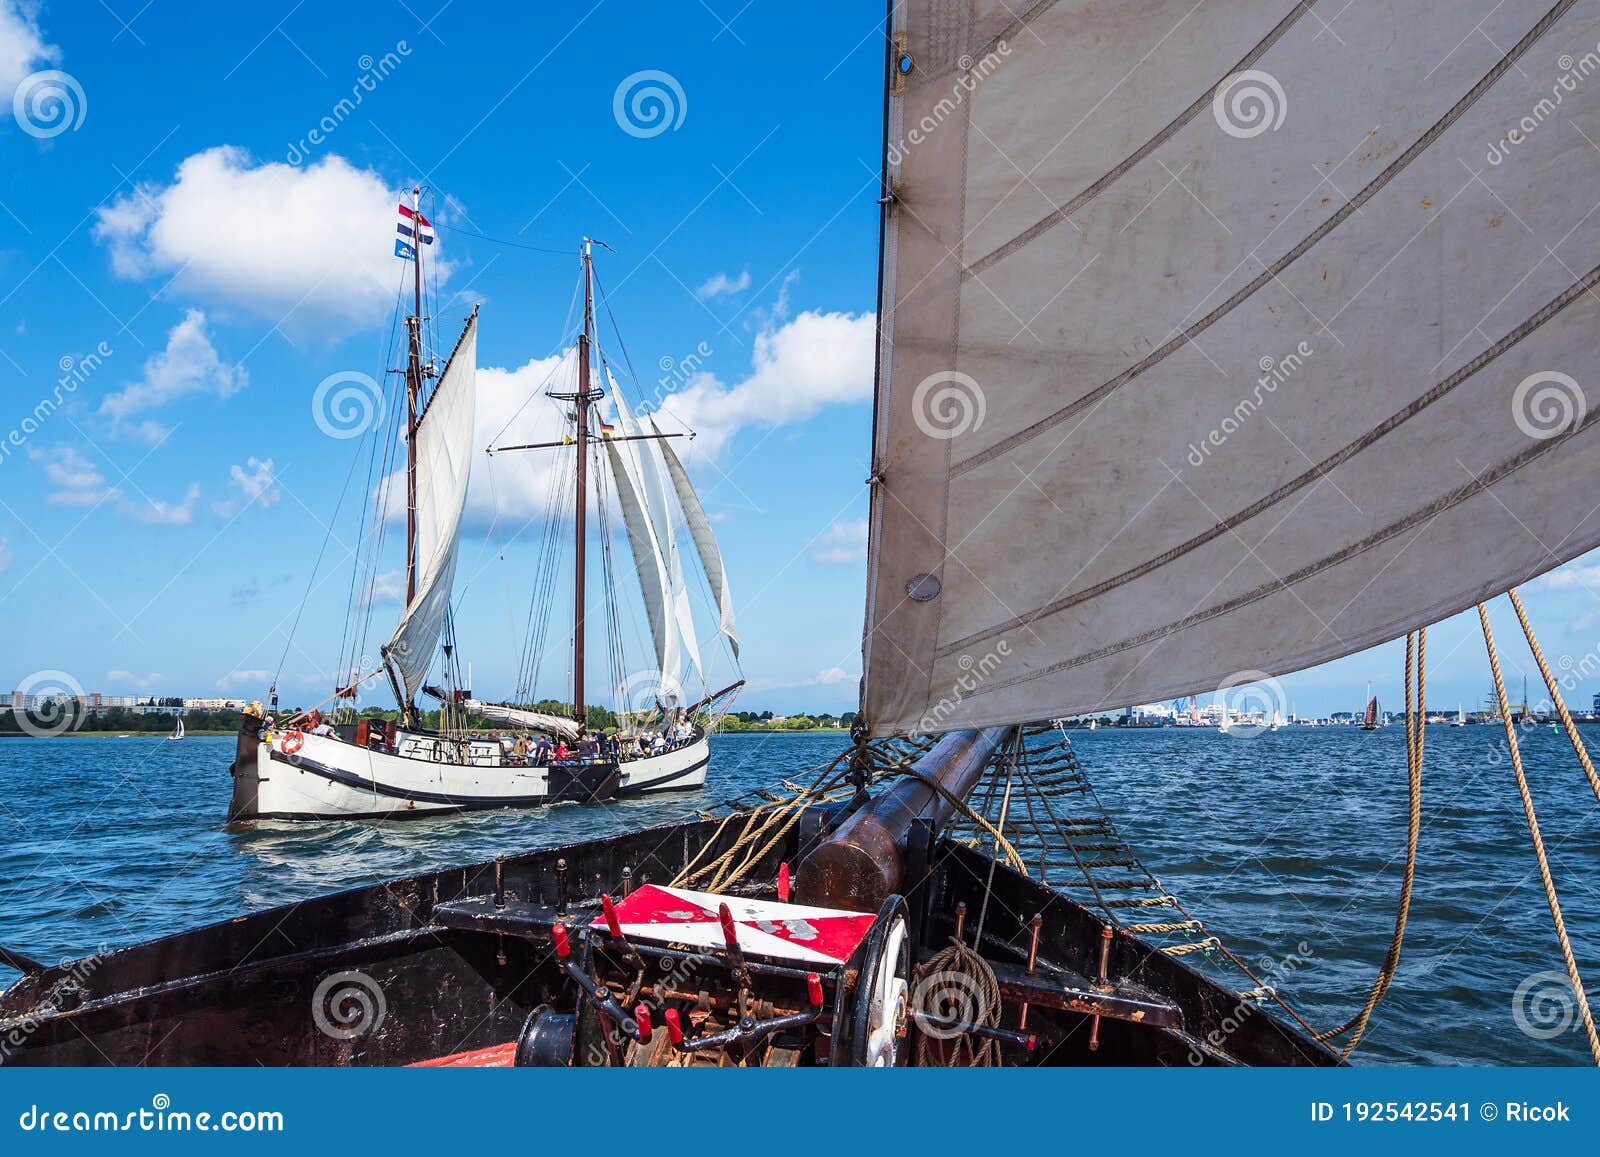 windjammer on the hanse sail in rostock, germany